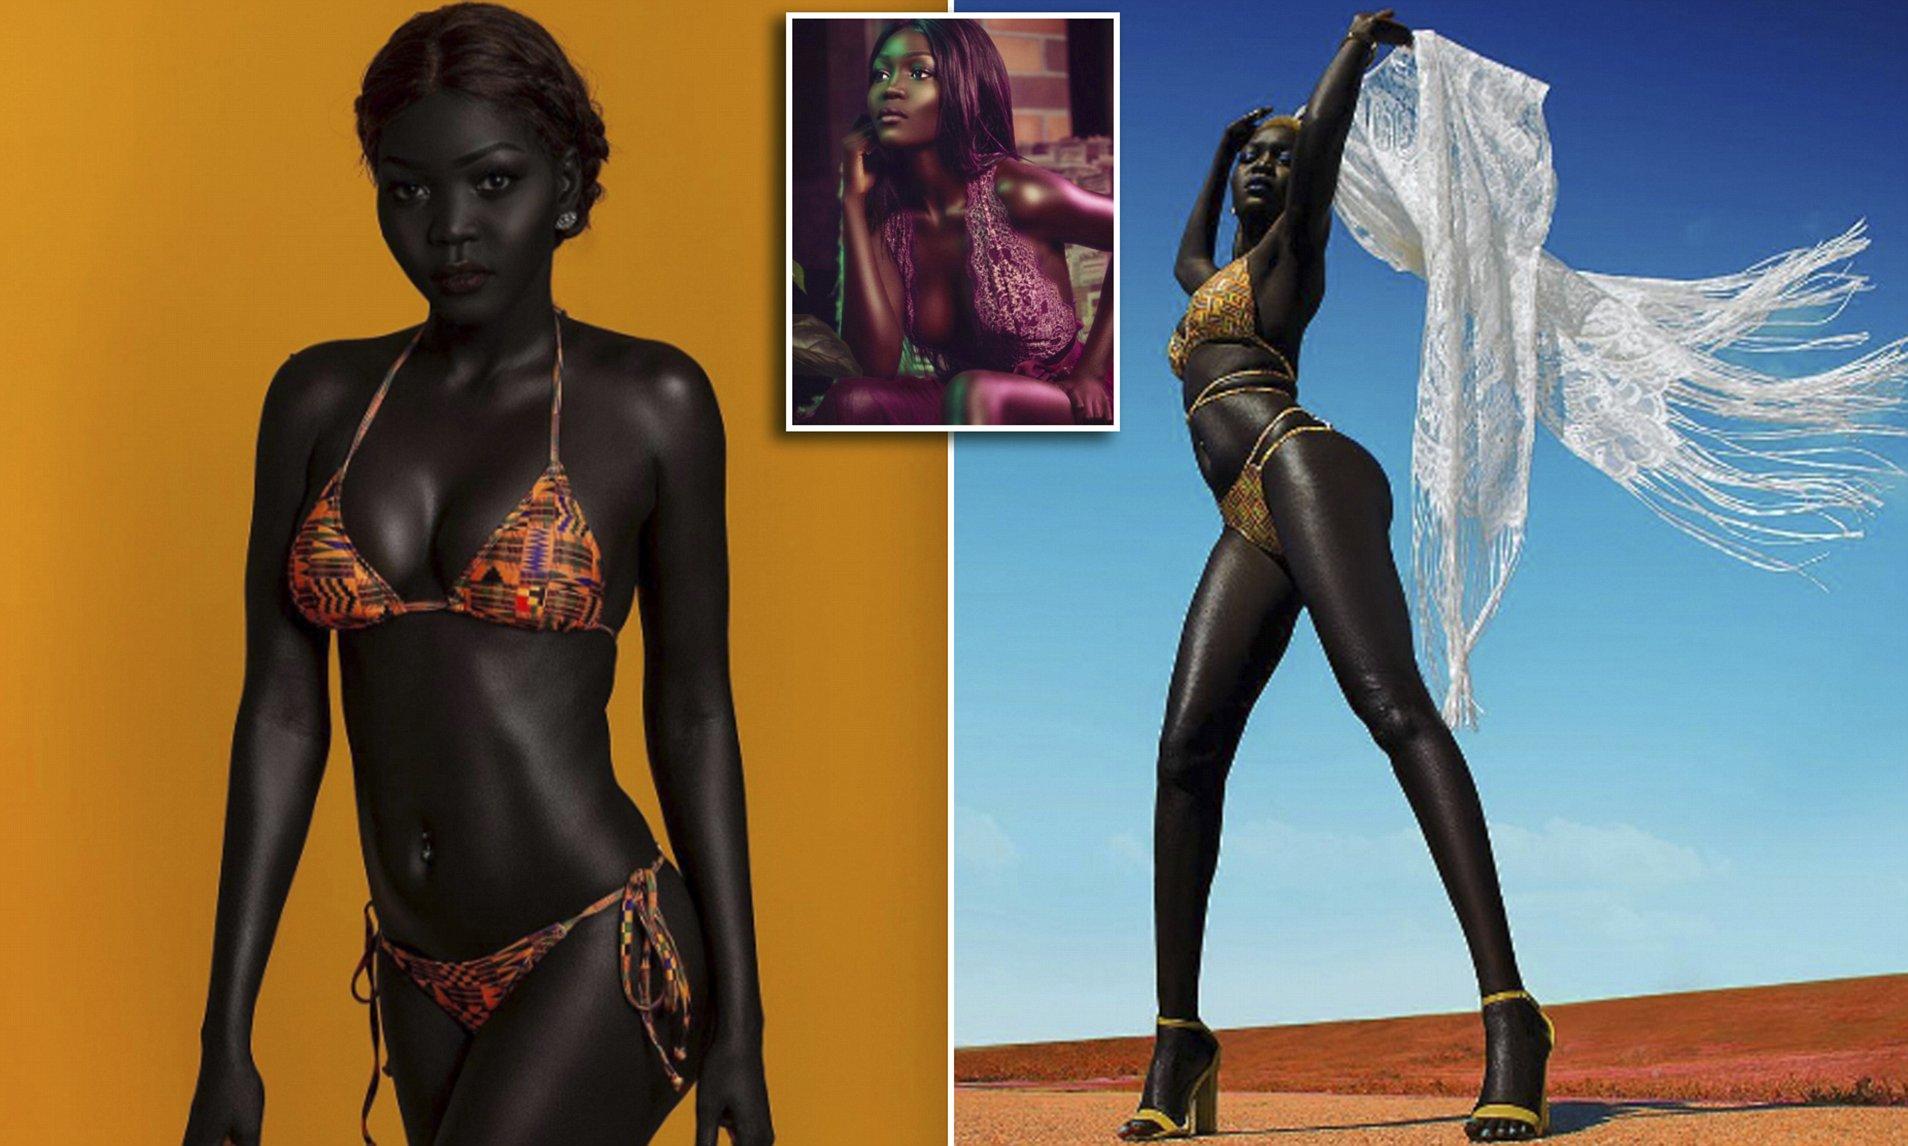 Meet the Sudanese model dubbed the Queen of the Dark. Daily